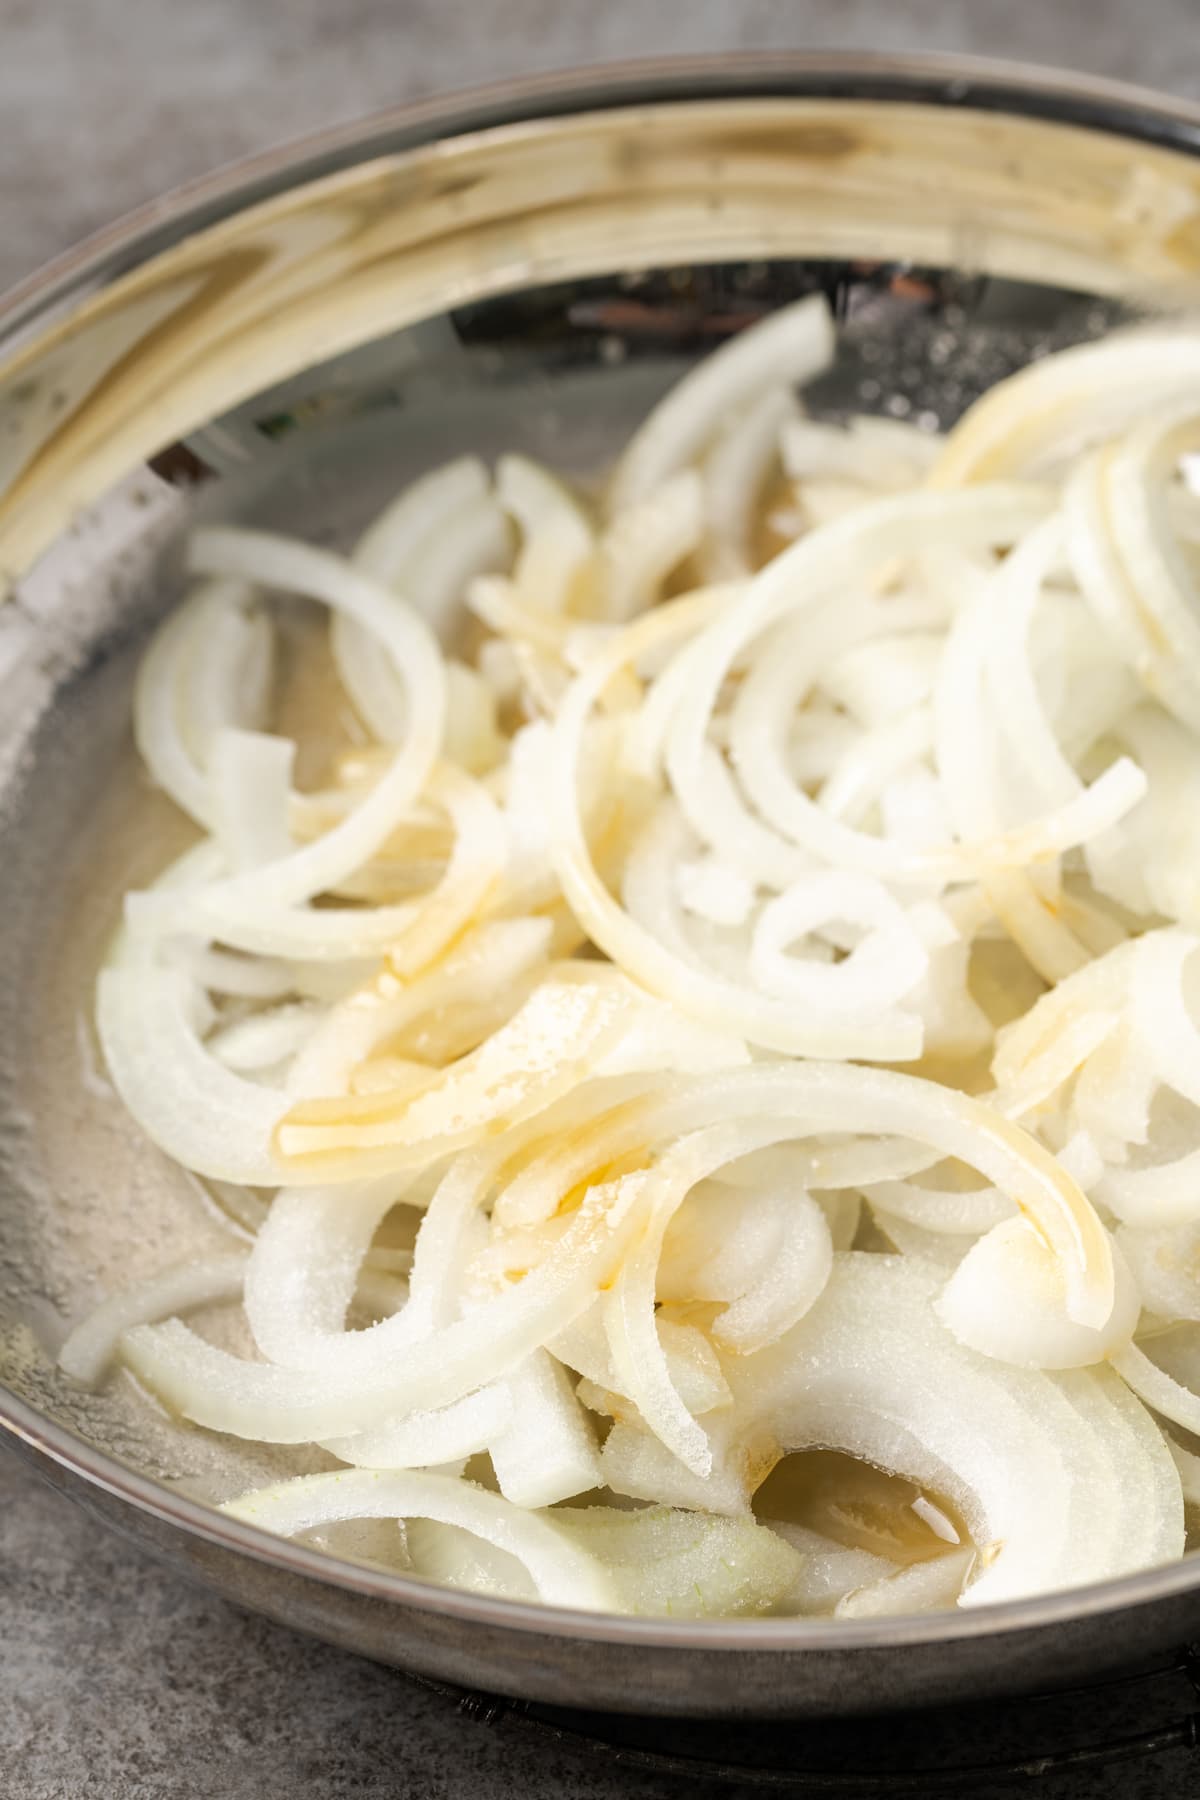 Uncooked onion slices added to a skillet.